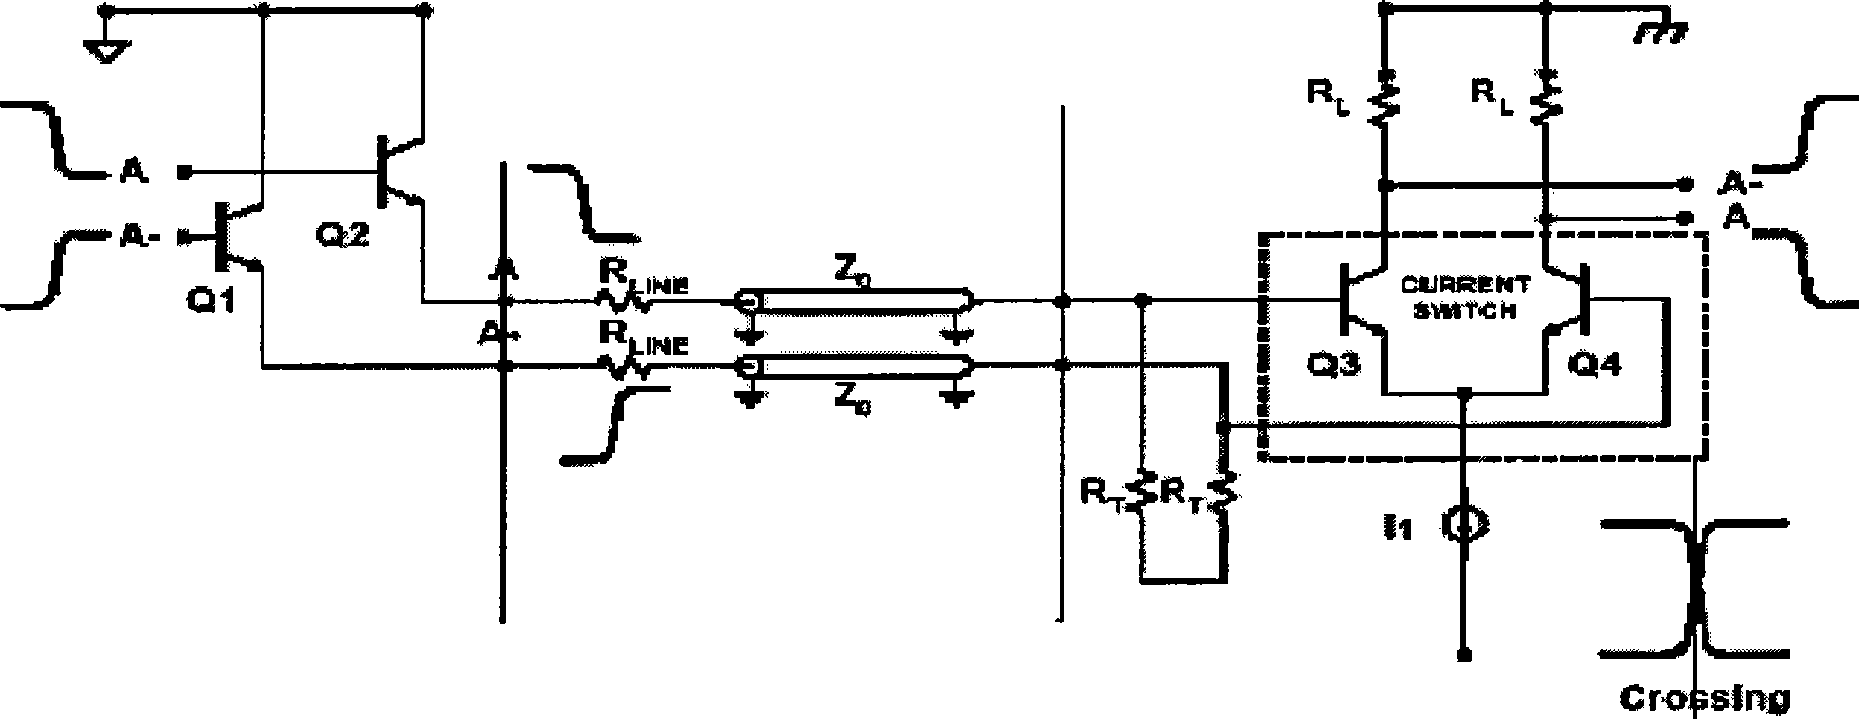 Analog wire laying method facing to integrated circuit digital-analog mixing test adapter